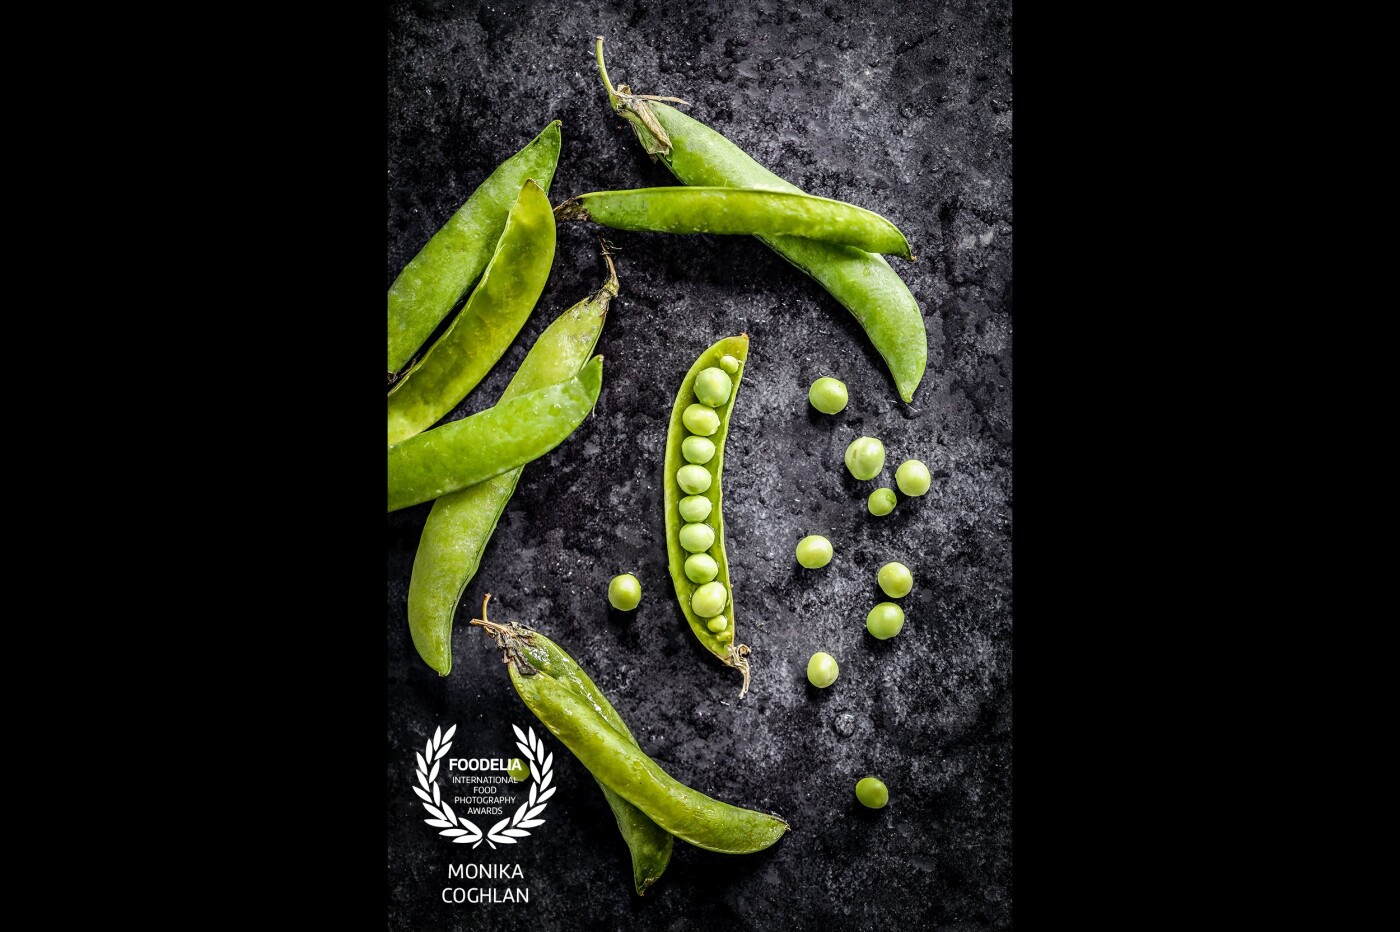 Peas in a Pod from the English Market in Cork, Ireland. The image was taken in March 2018 and later on transformed into a Food Art Print which can be purchased on my website: http://pepperazzi.ie/food-art-prints/